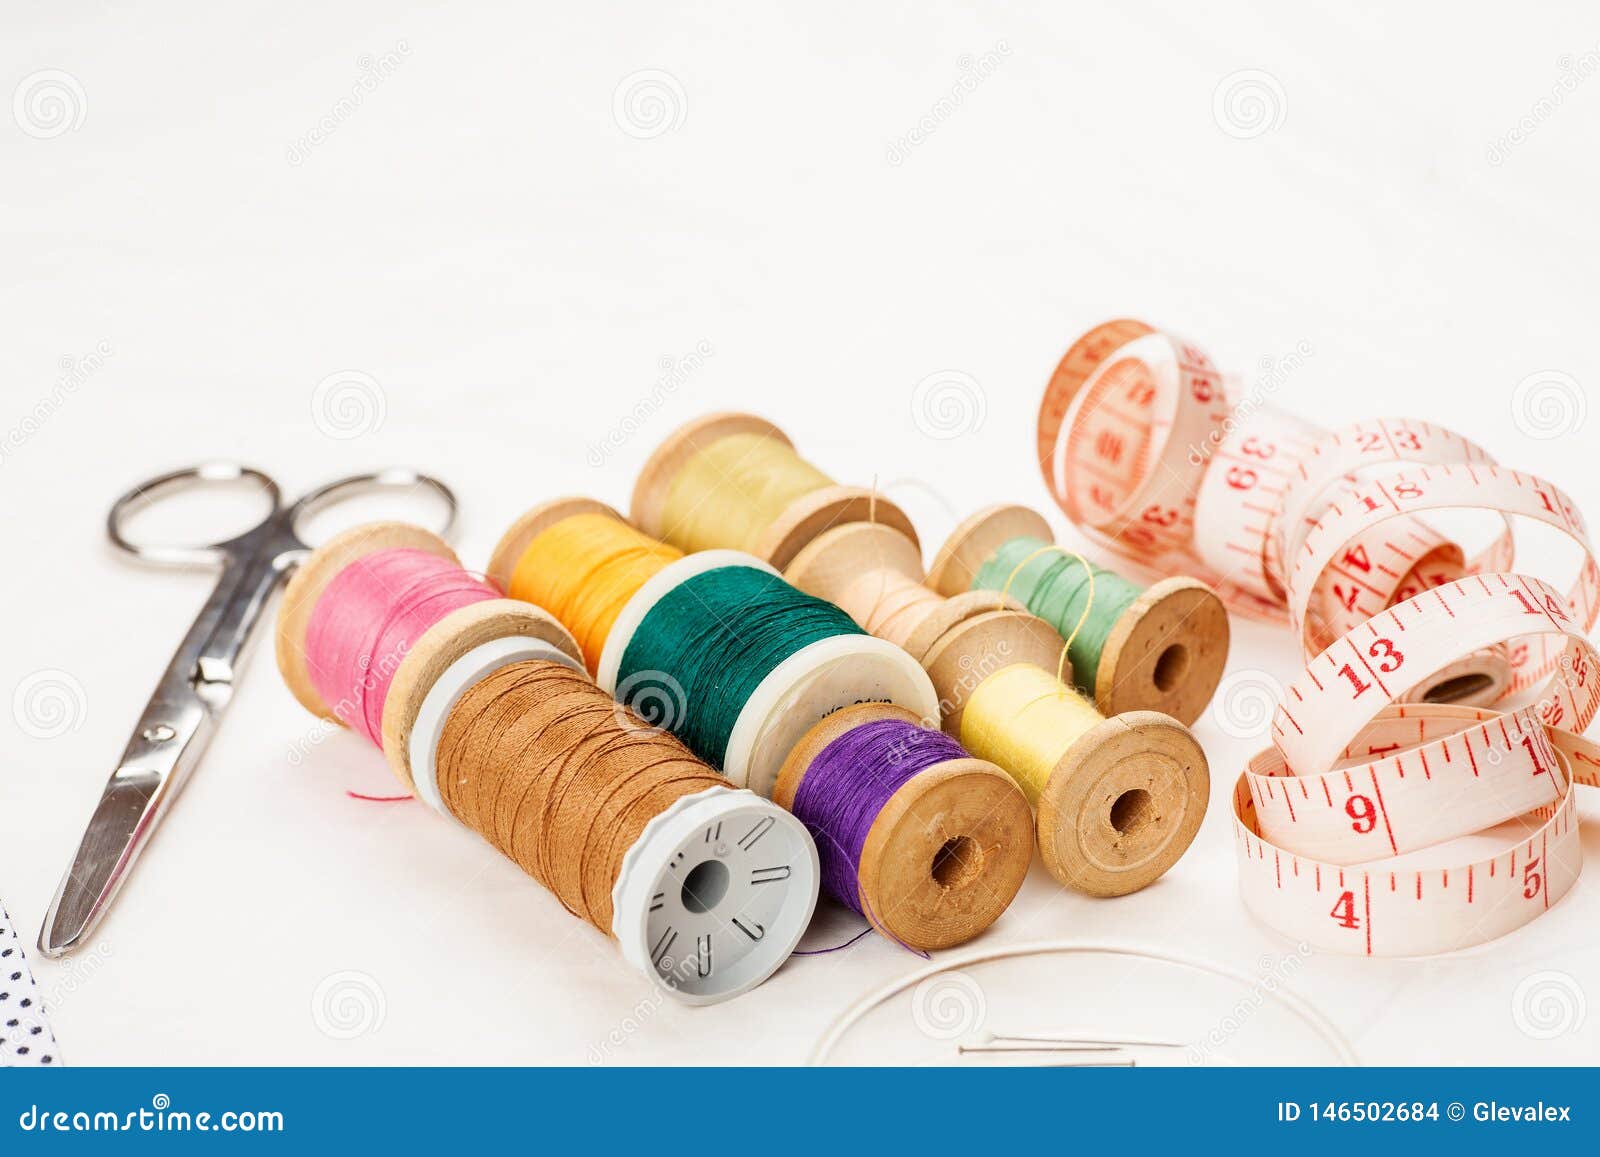 Set of Tools and Accessories for Sewing and Needlework with Threads in ...